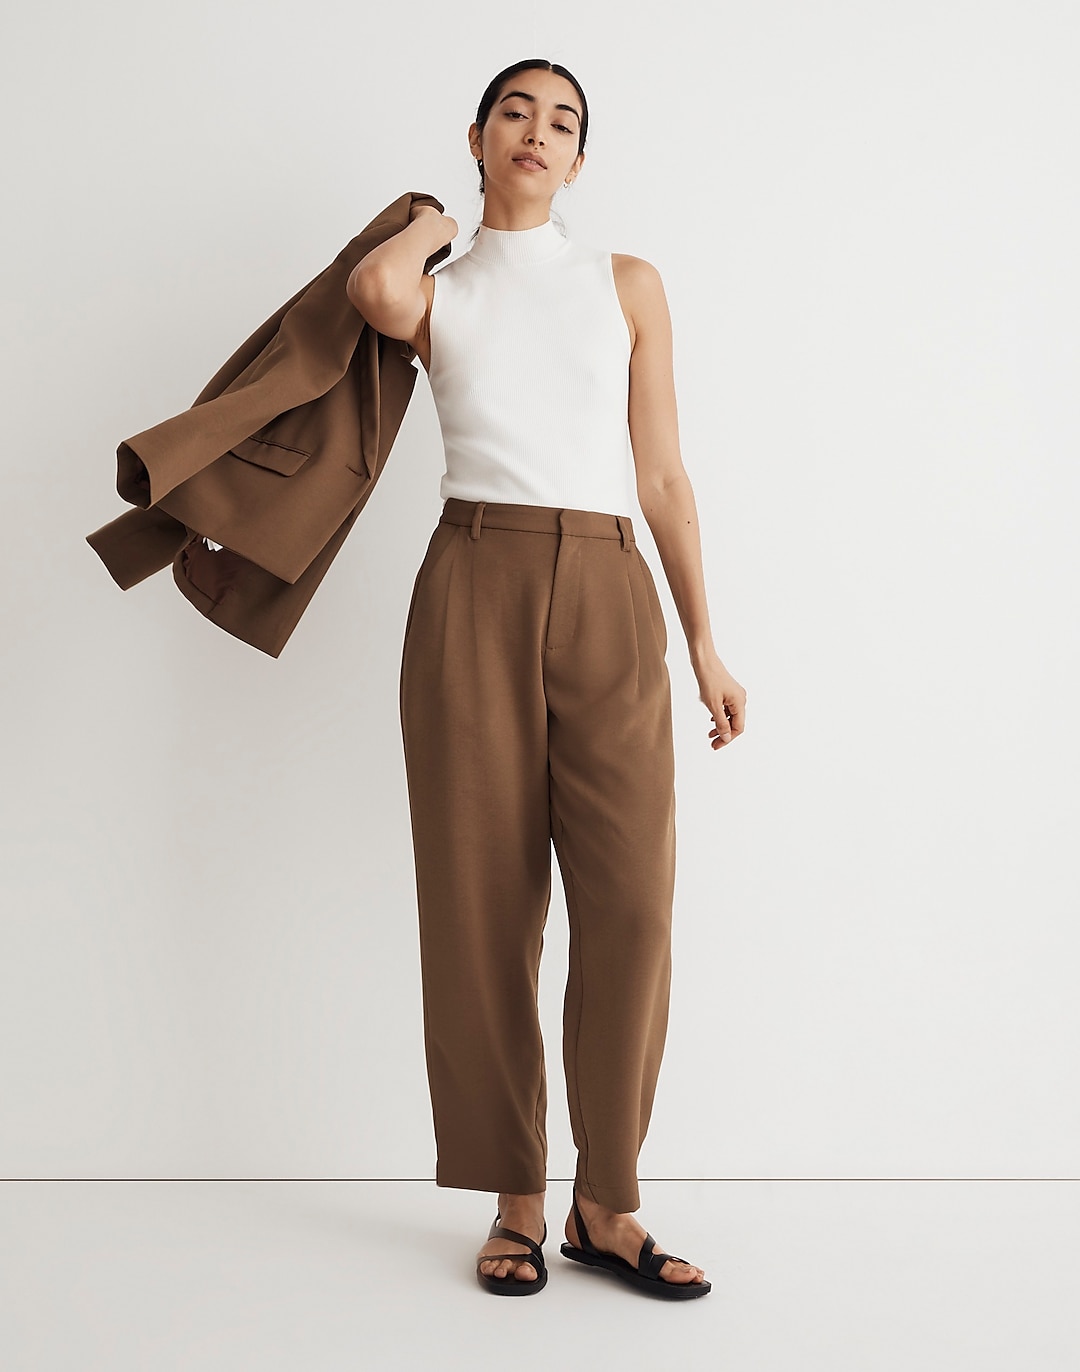 Where to buy pleated pants for petites? : r/PetiteFashionAdvice